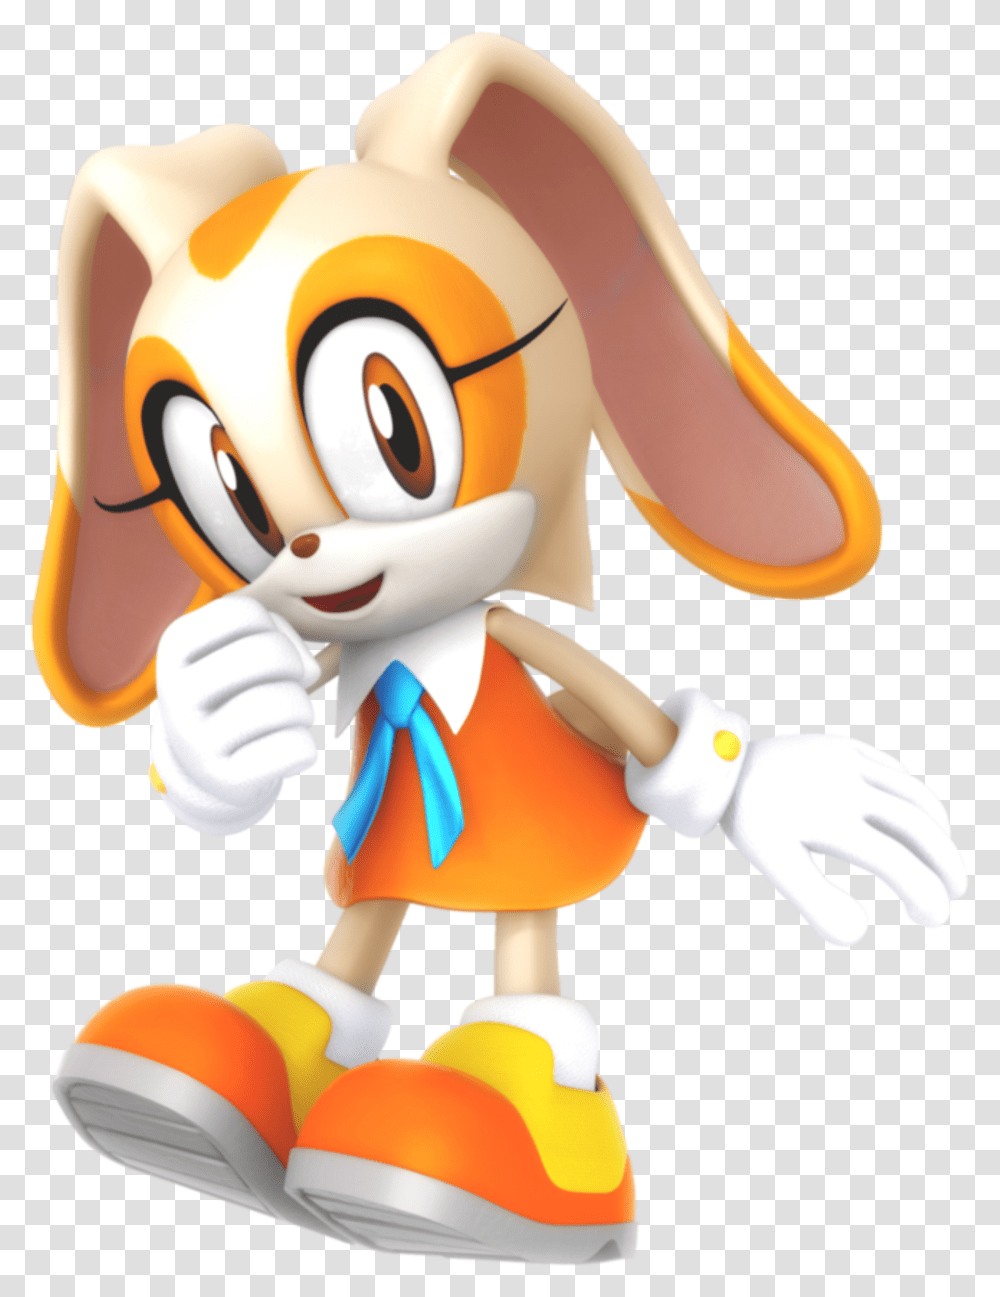 Cream The Rabbit 3d, Toy, Figurine, Doll Transparent Png